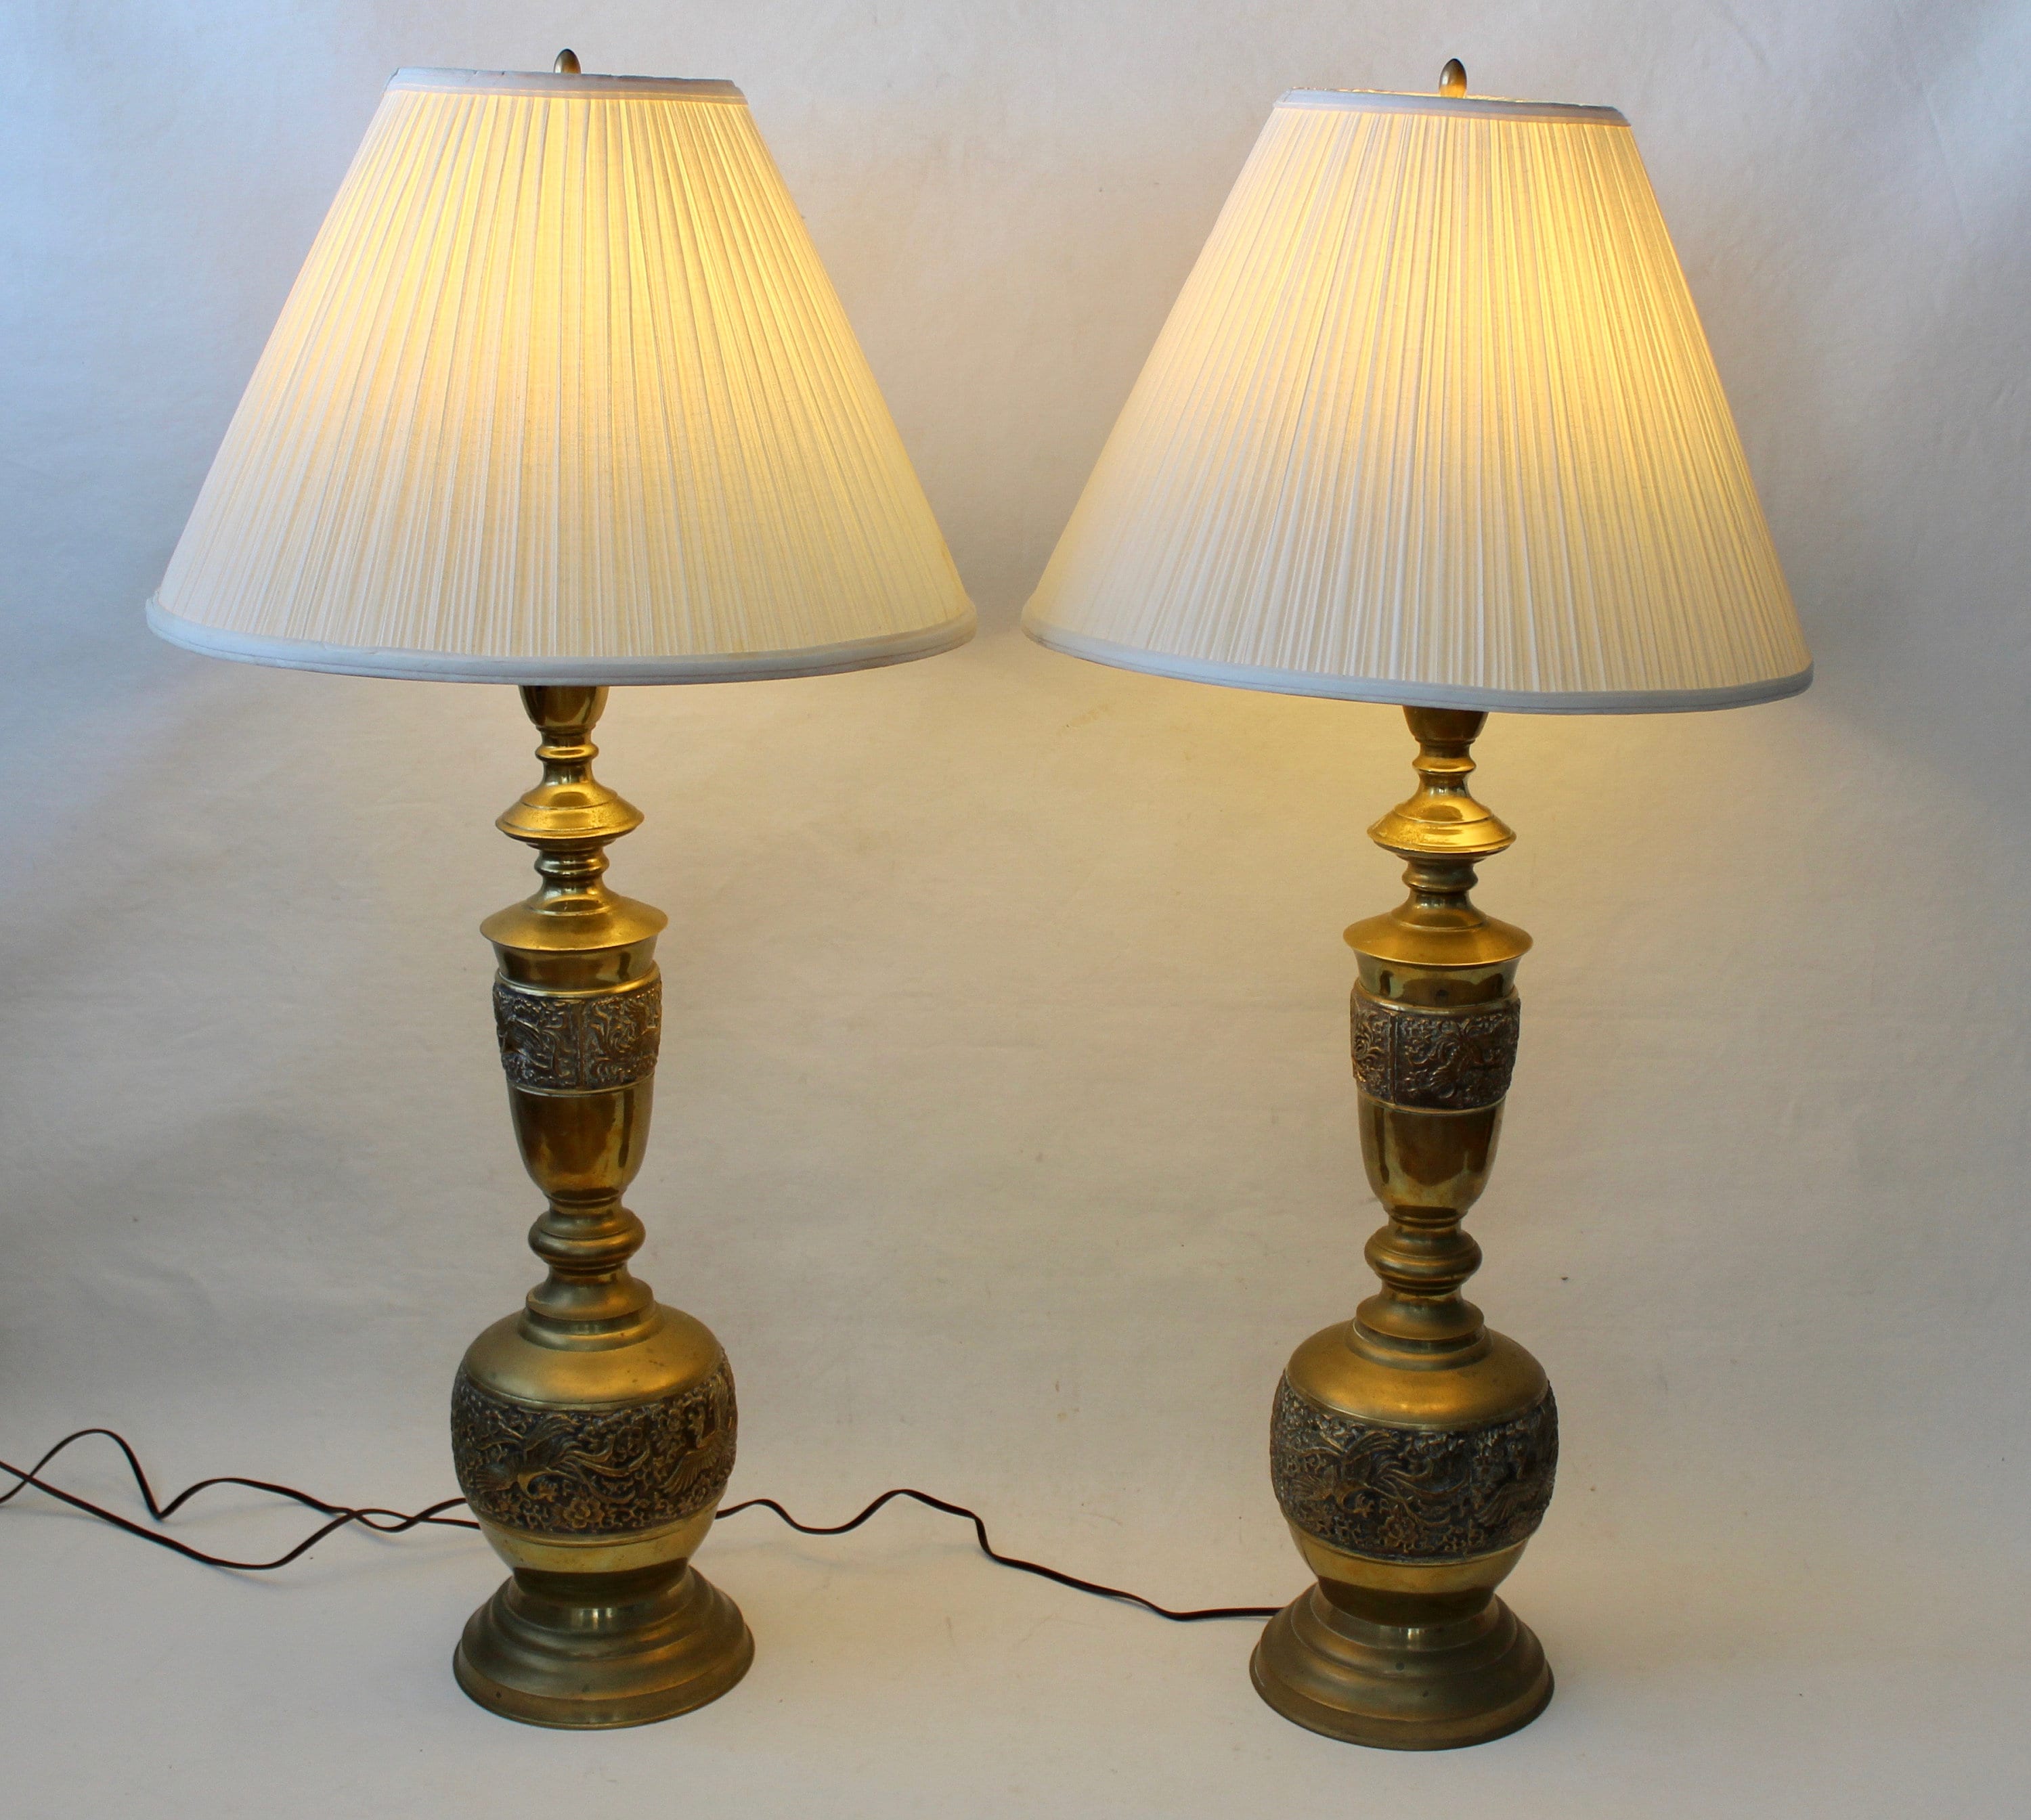 James Mont 1950s Vintage Mid Century Large Brass Table Lamp-a Pair